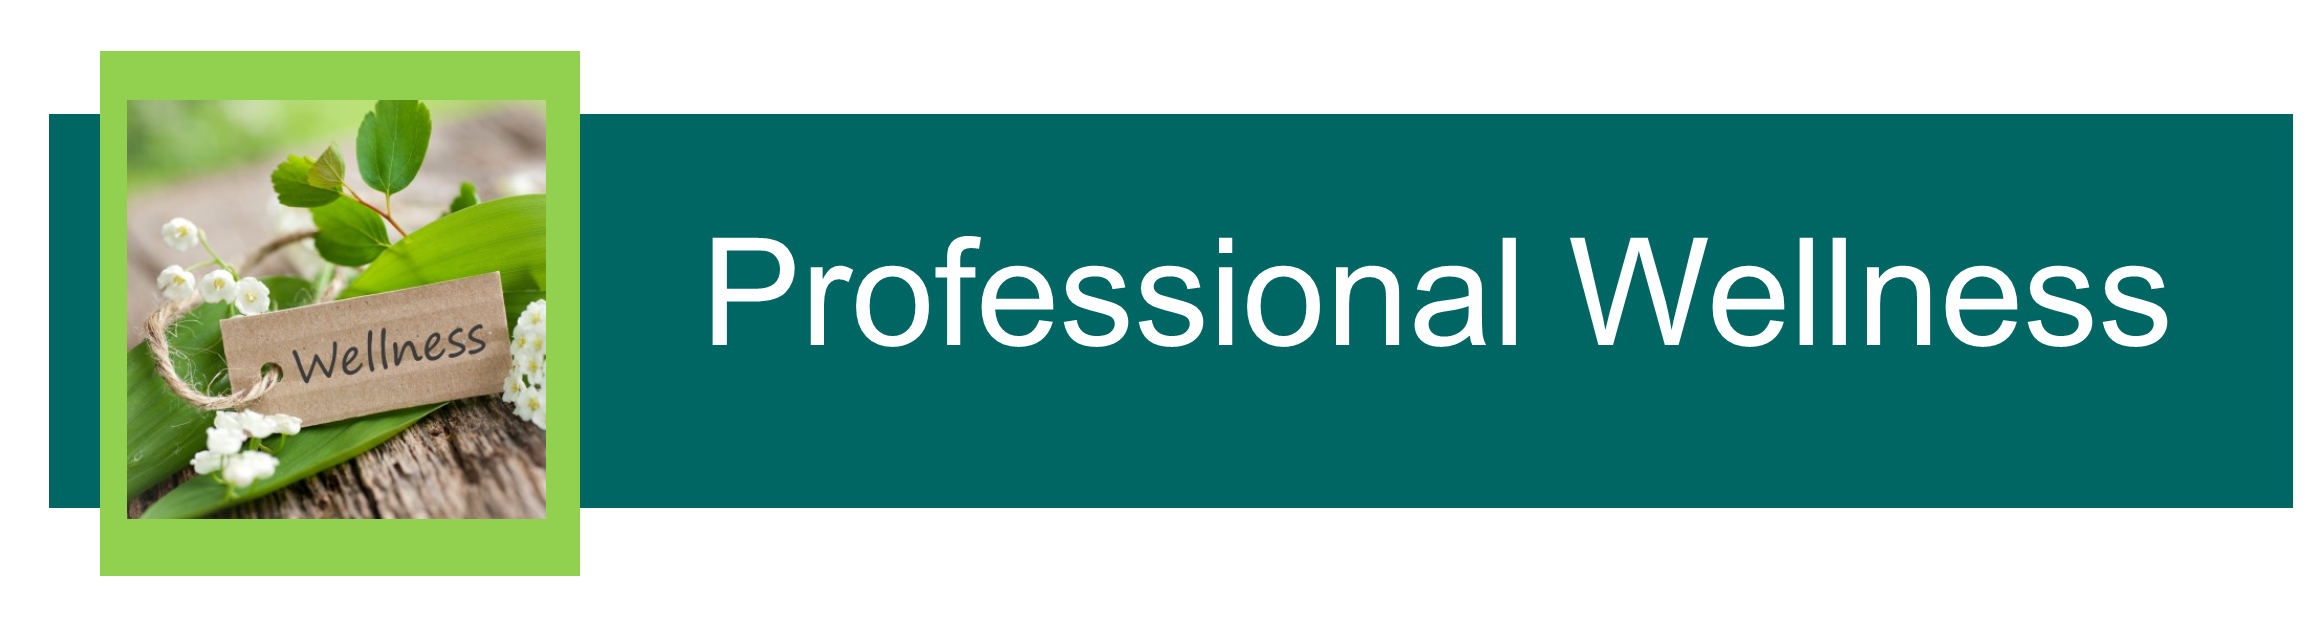 Your Profession Professional Wellness National Association - 